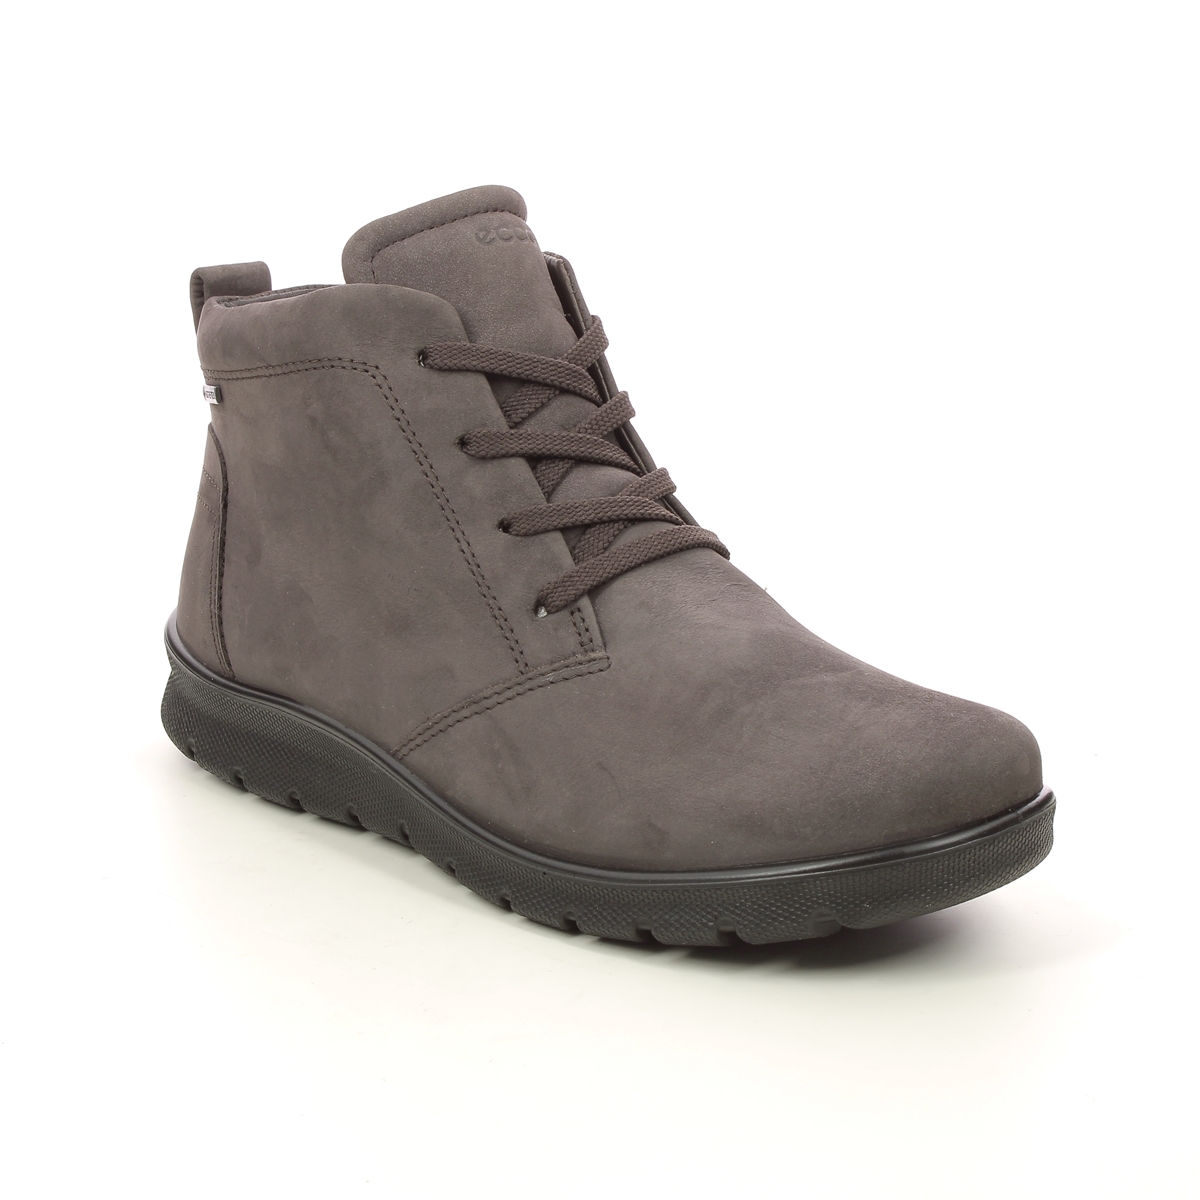 Ecco Babett Lo Gtx Brown Nubuck Womens Lace Up Boots 215583-02576 In Size 37 In Plain Brown Nubuck